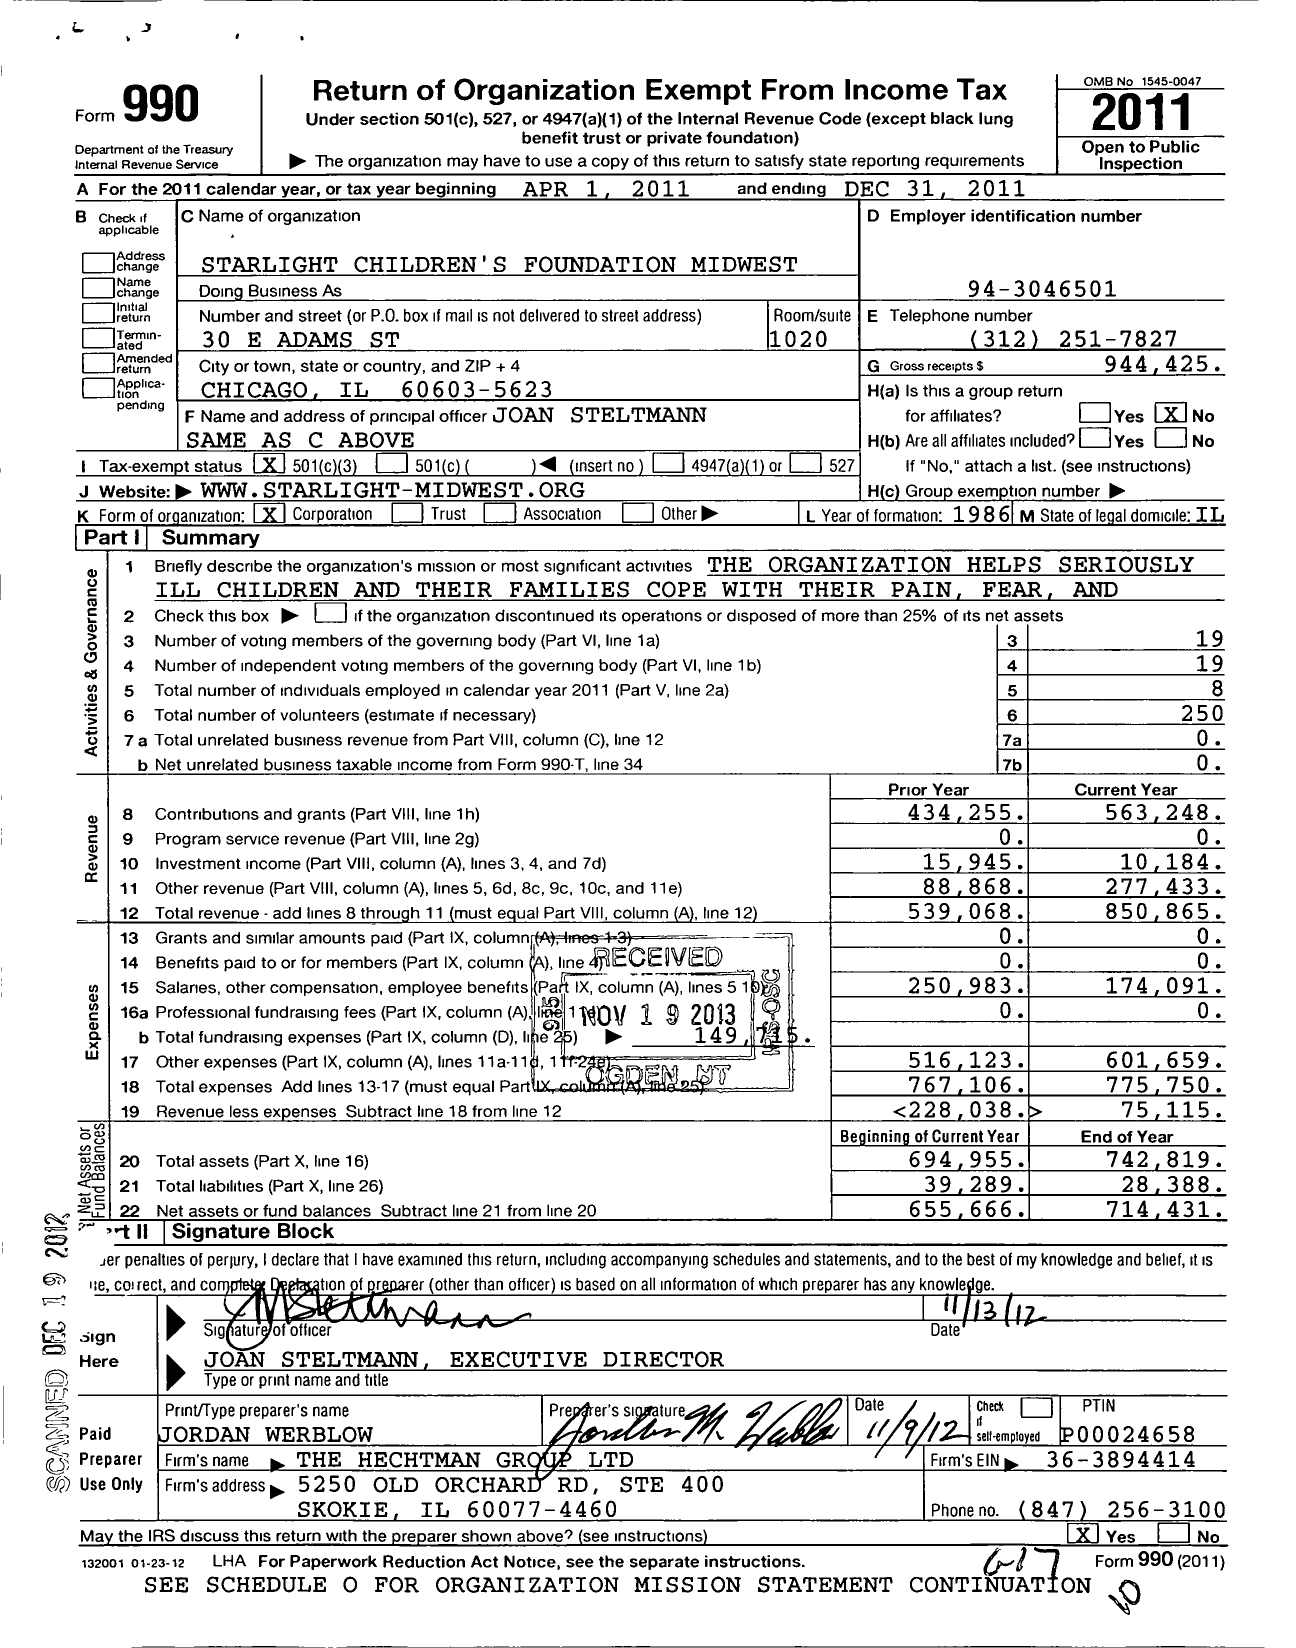 Image of first page of 2011 Form 990 for Starlight Childrens Foundation Midwest